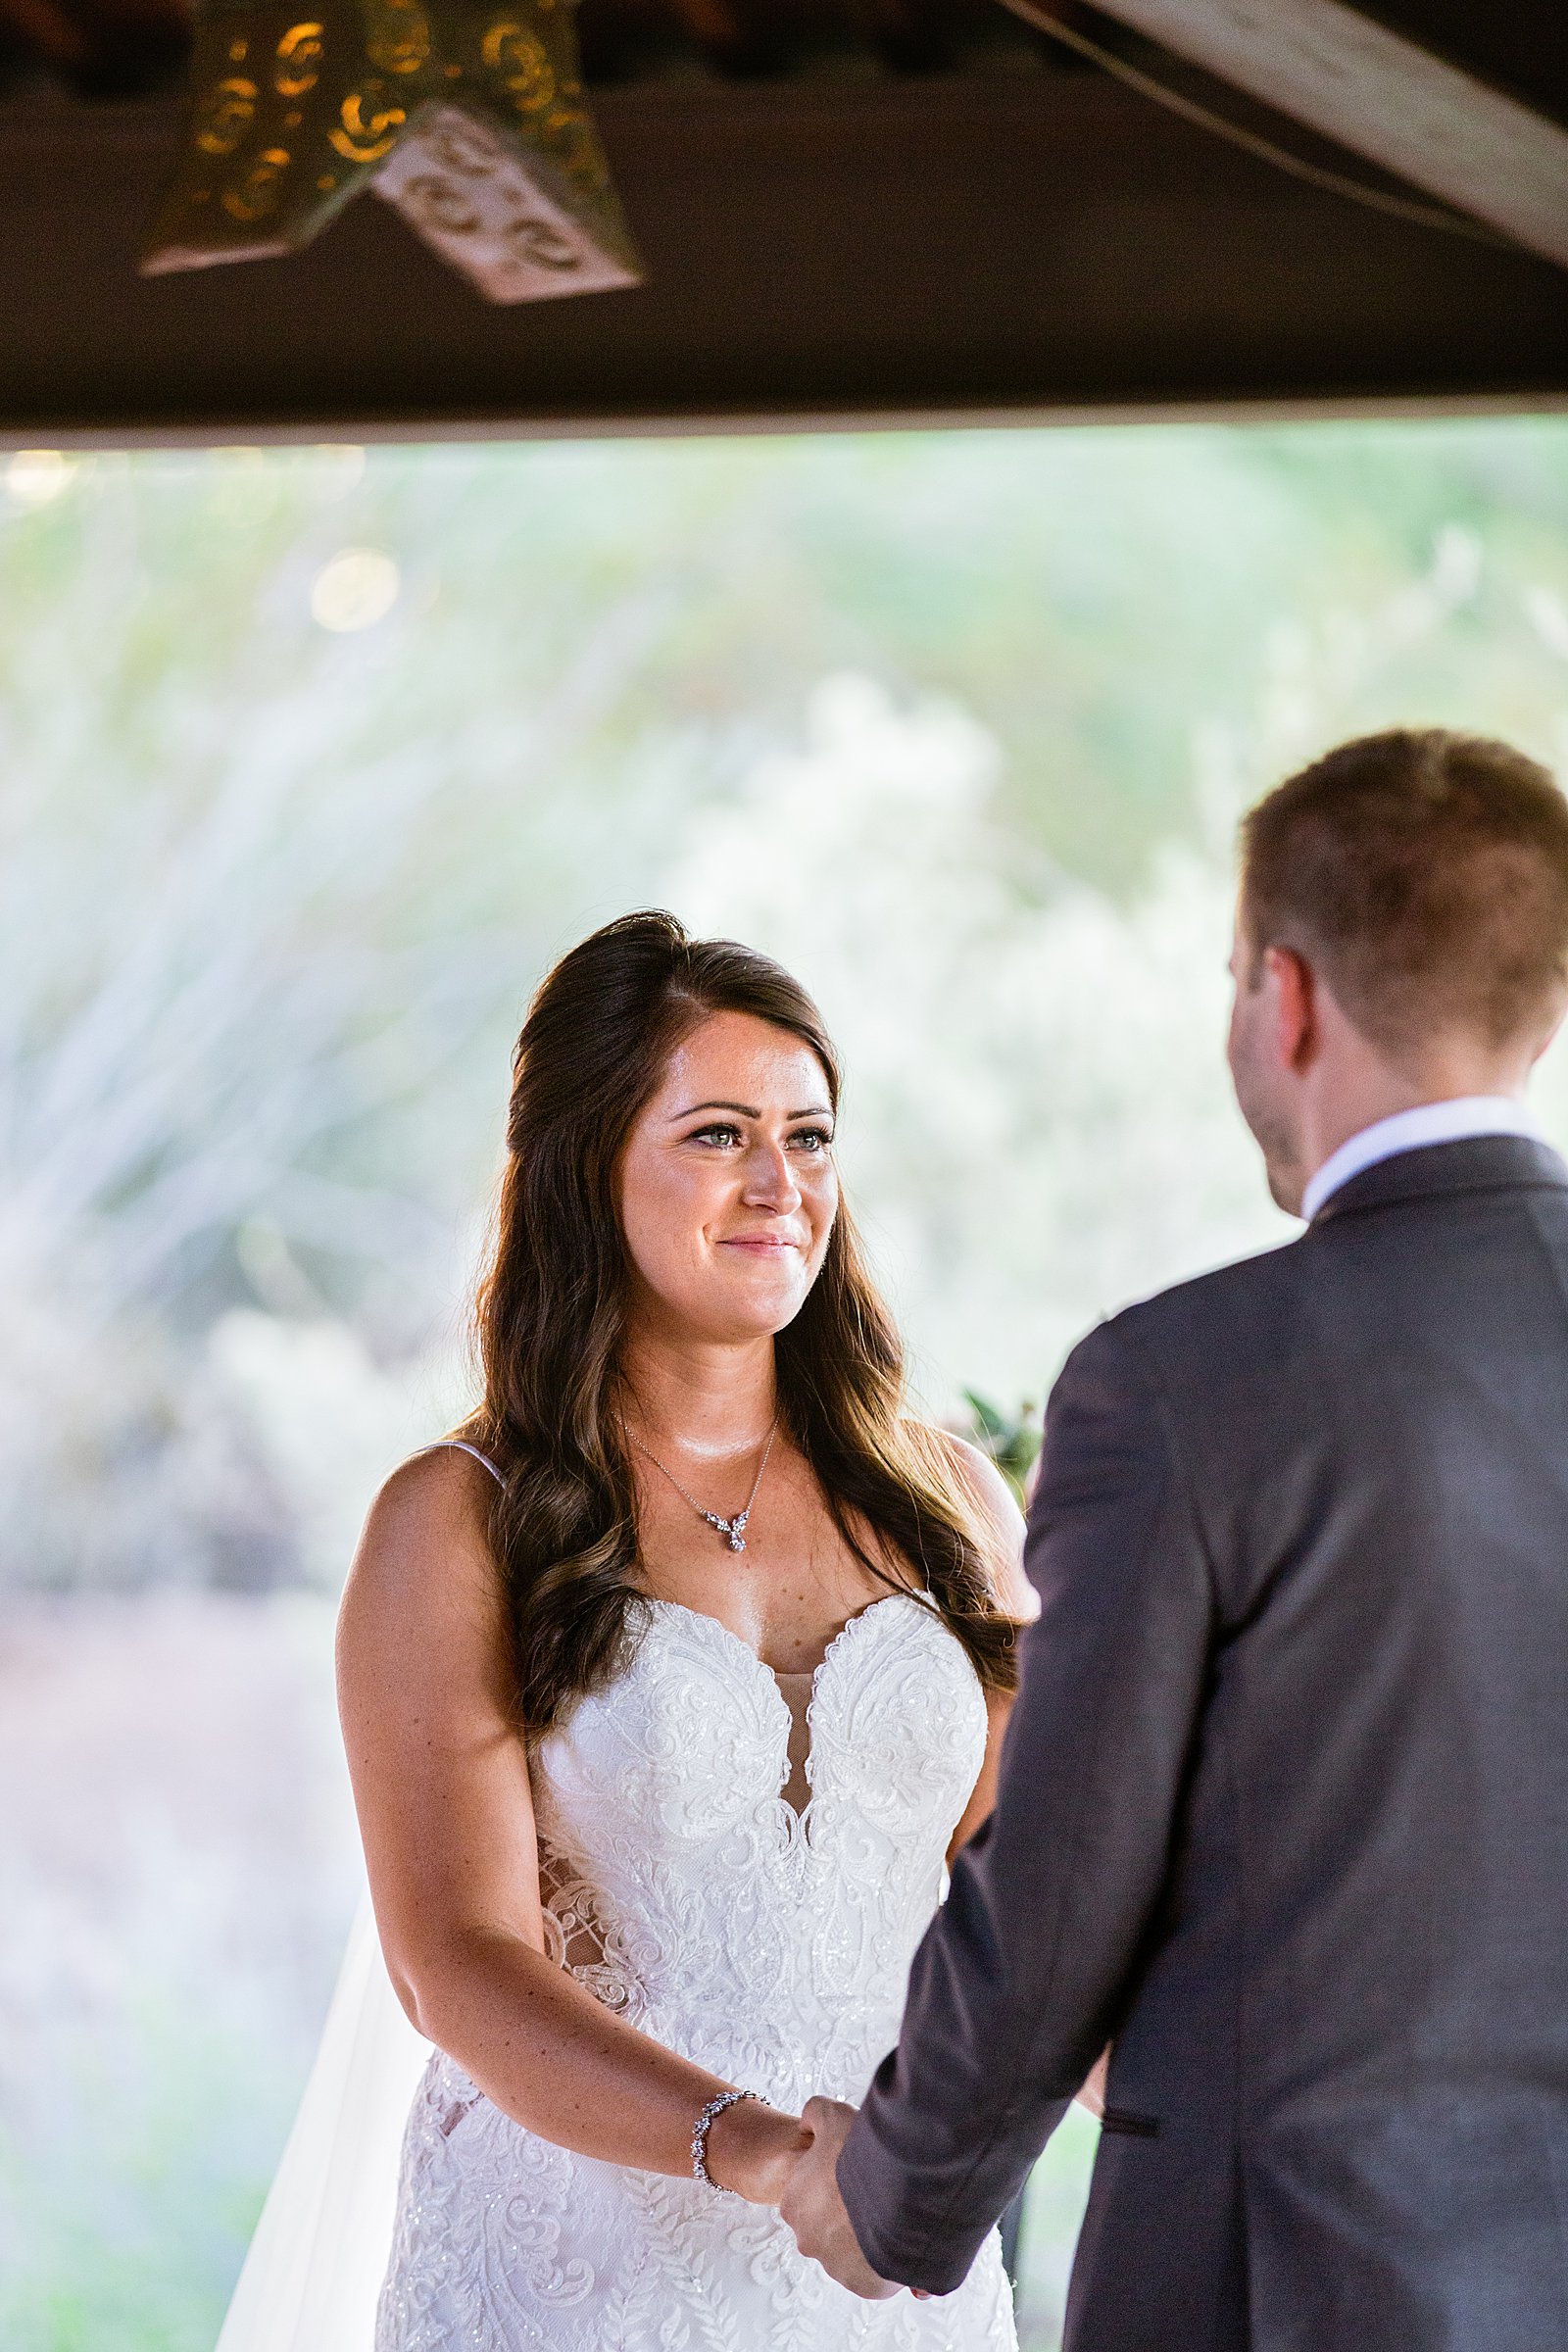 Bride looking at her groom during their wedding ceremony at Desert Botanical Gardens by Phoenix wedding photographer PMA Photography.